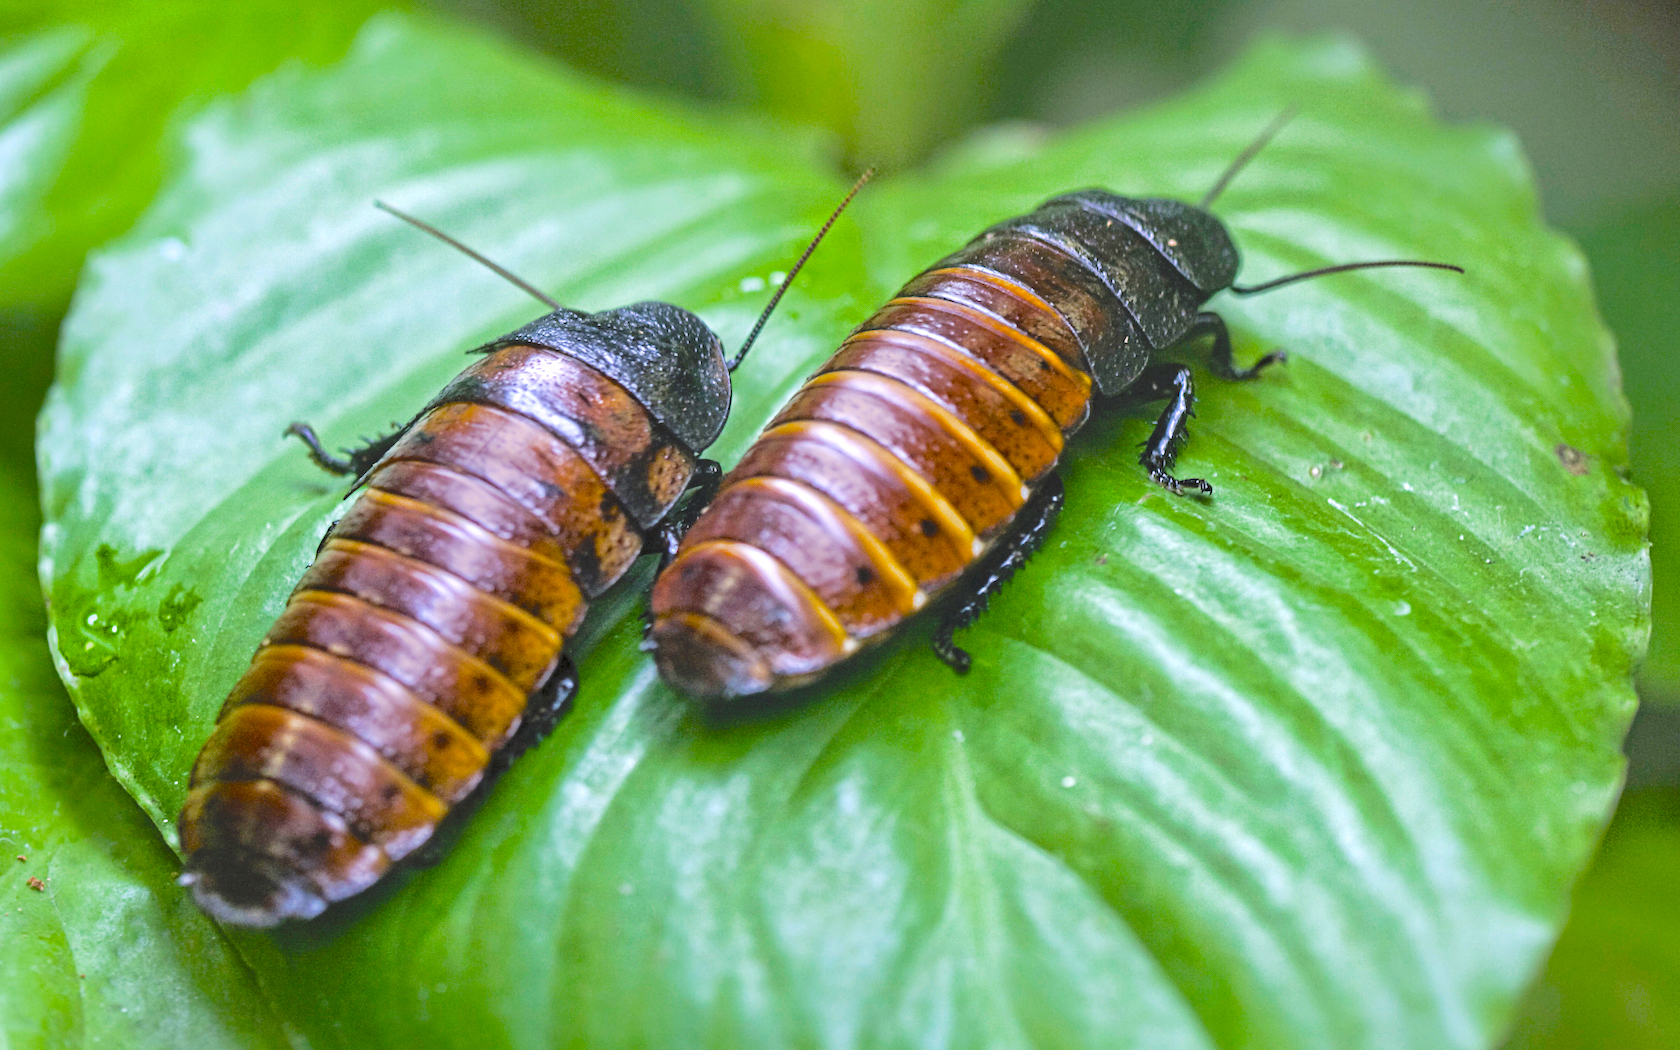 Bronx Zoo will name a Madagascan hissing cockroach after your Valentine's Day date